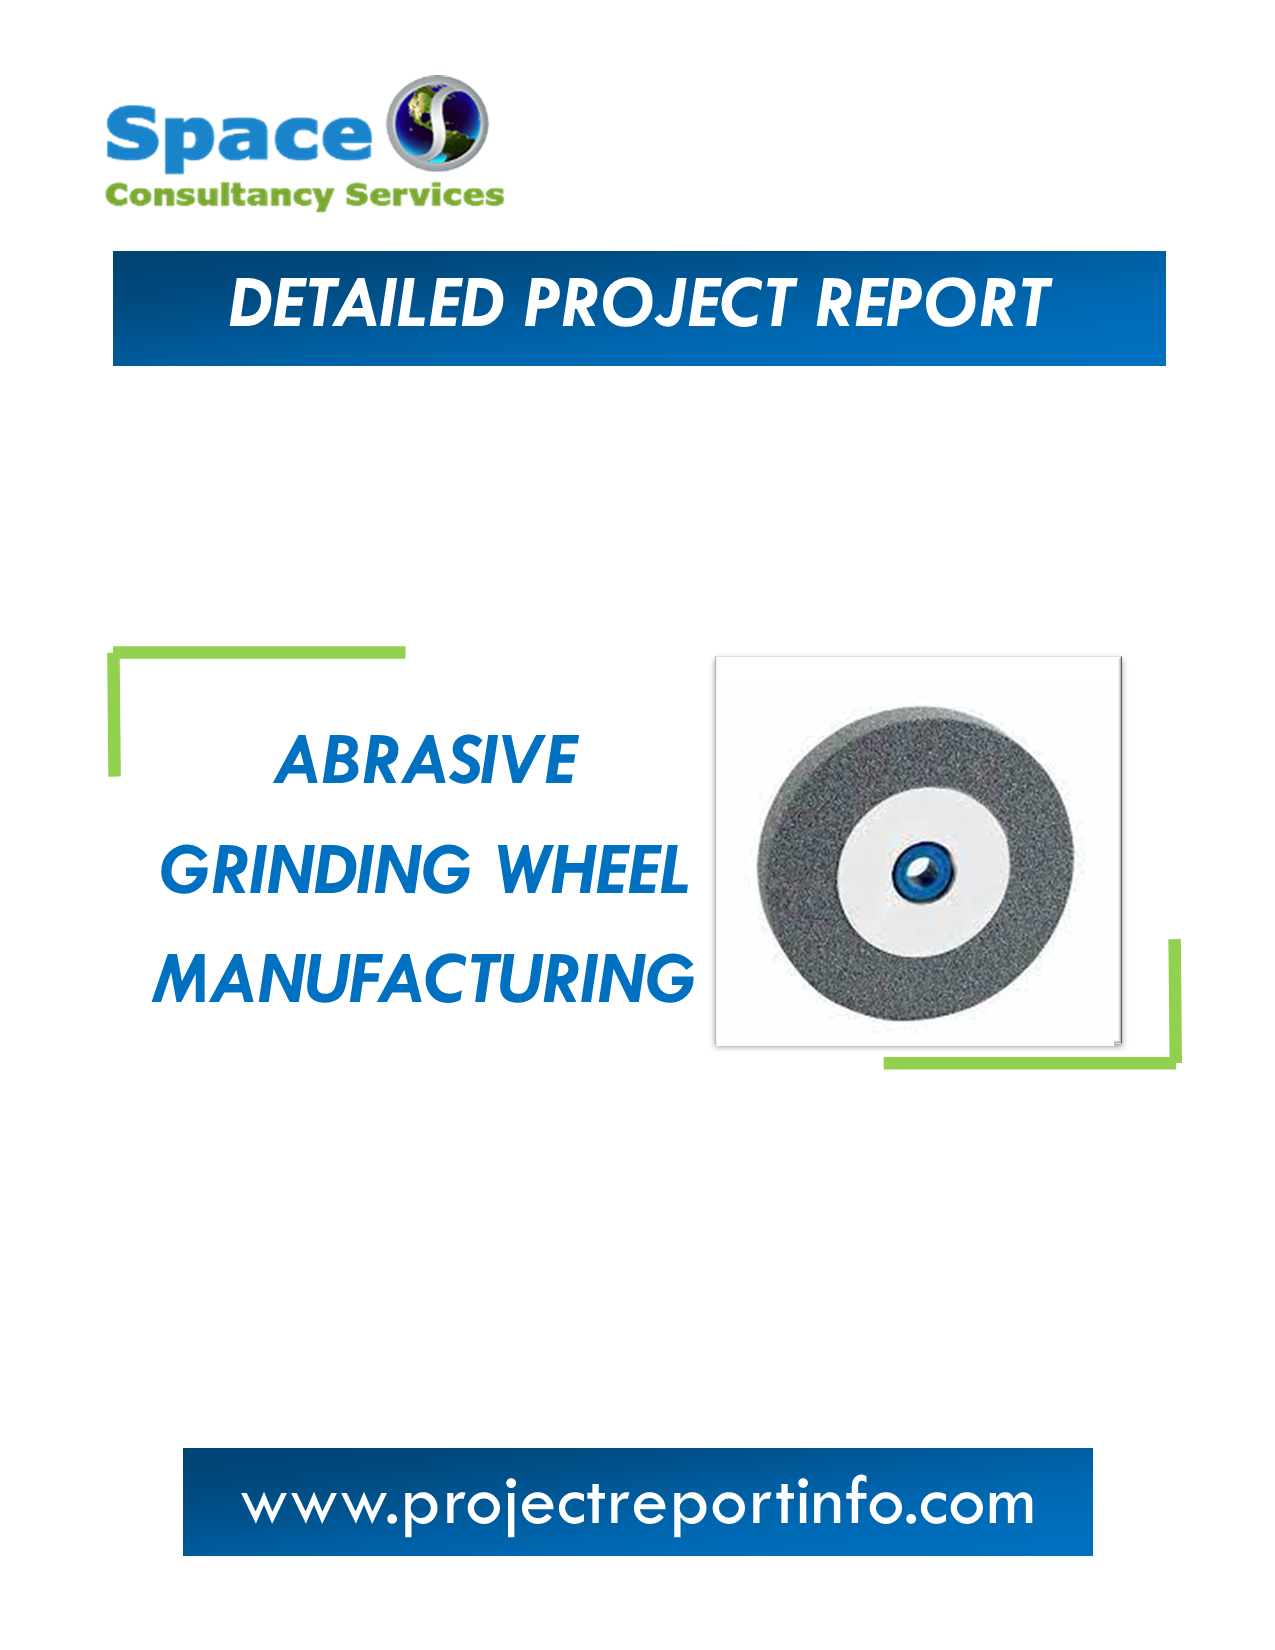 Project Report on Abrasive Grinding Wheel Manufacturing